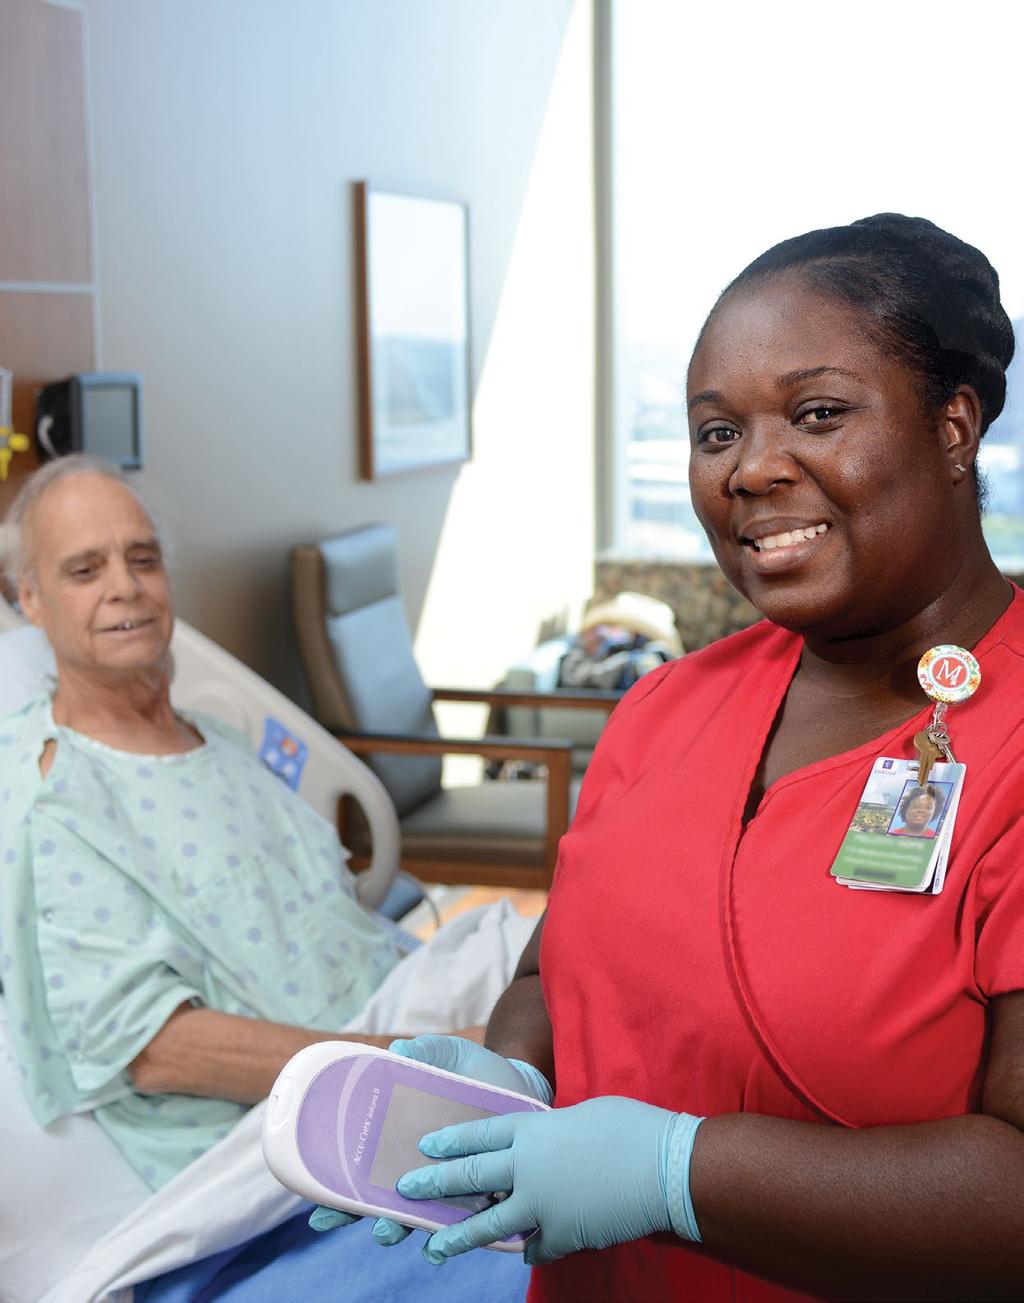 Taking care of our resources today brings lasting benefits to our patients and community.